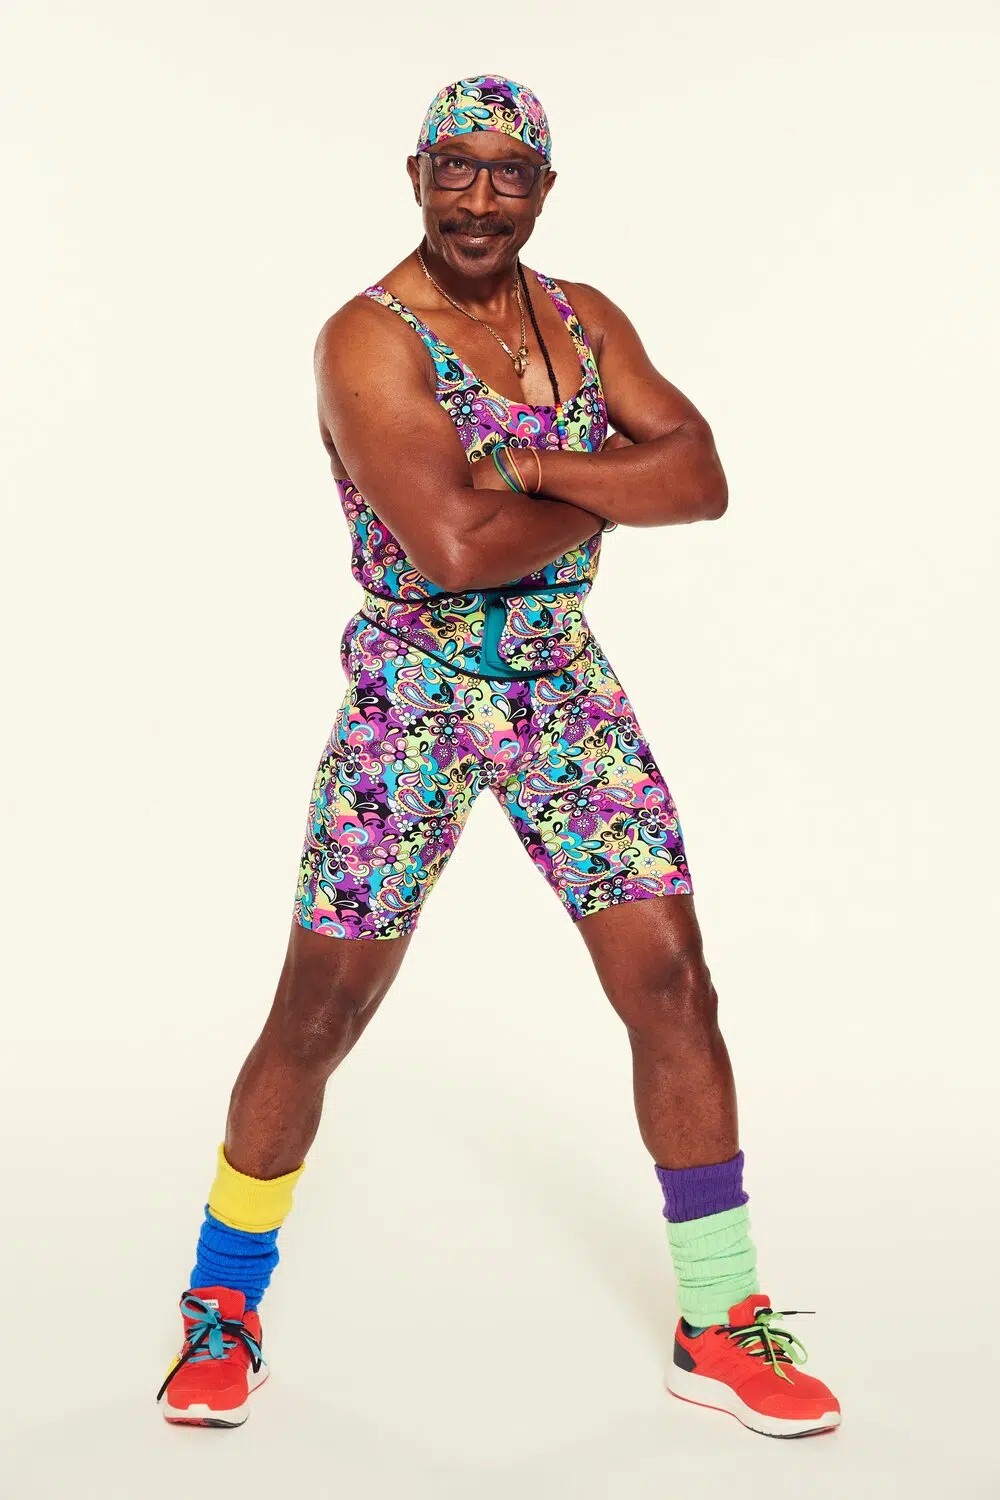 Mr Motivator’s 6 Steps For Staying Mentally And Physically Strong In Lockdown